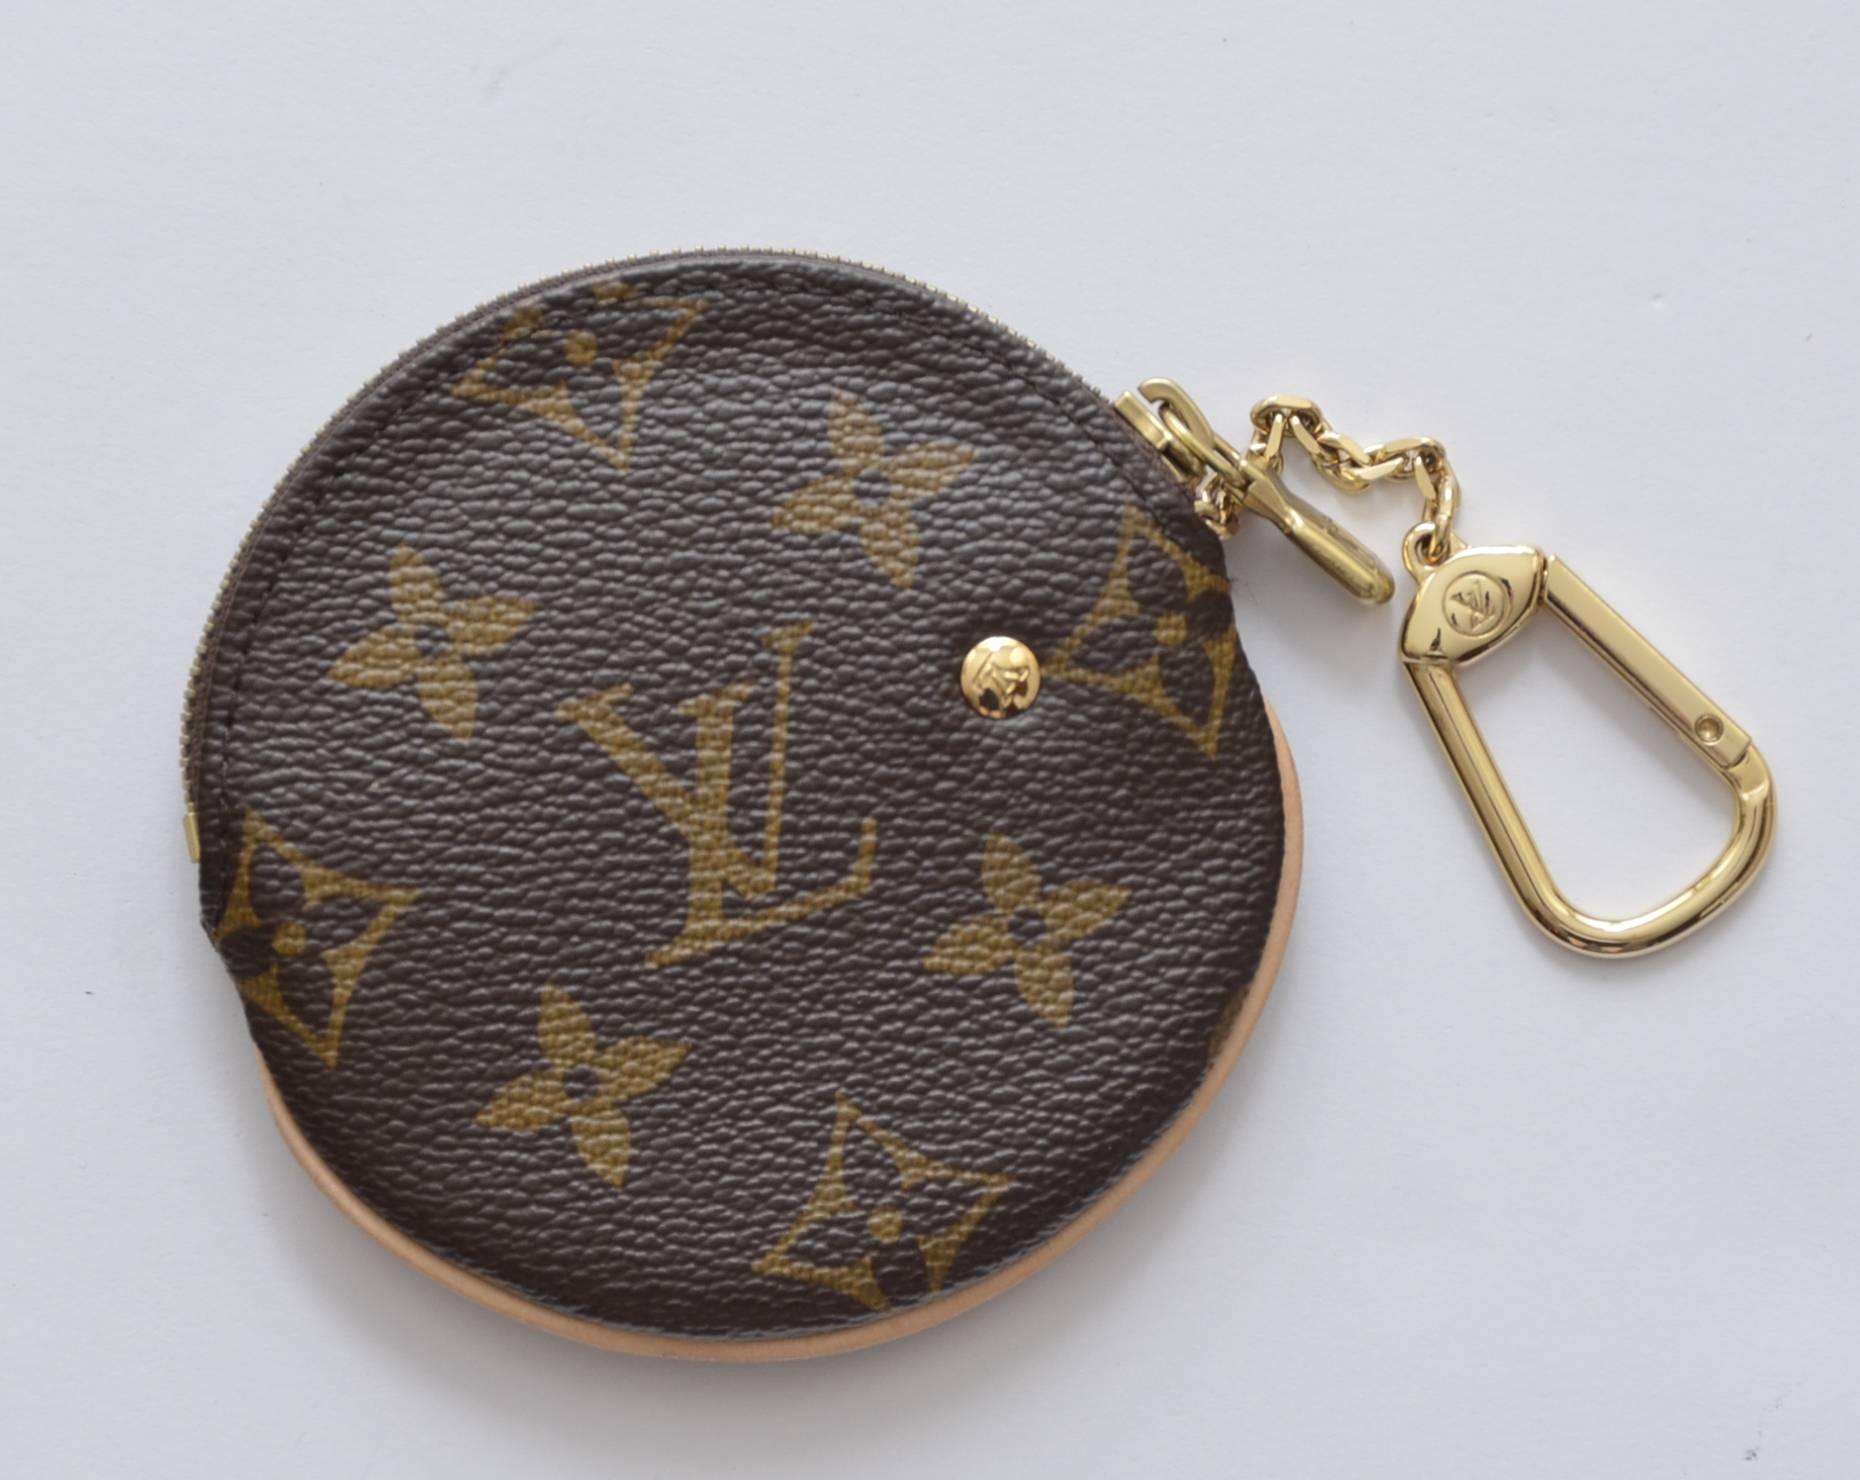 Louis Vuitton LV Monogram Takashi Murakami Hands coin purse.
Excellent condition.
I have LV handbag from same collection listed.

FINAL SALE.